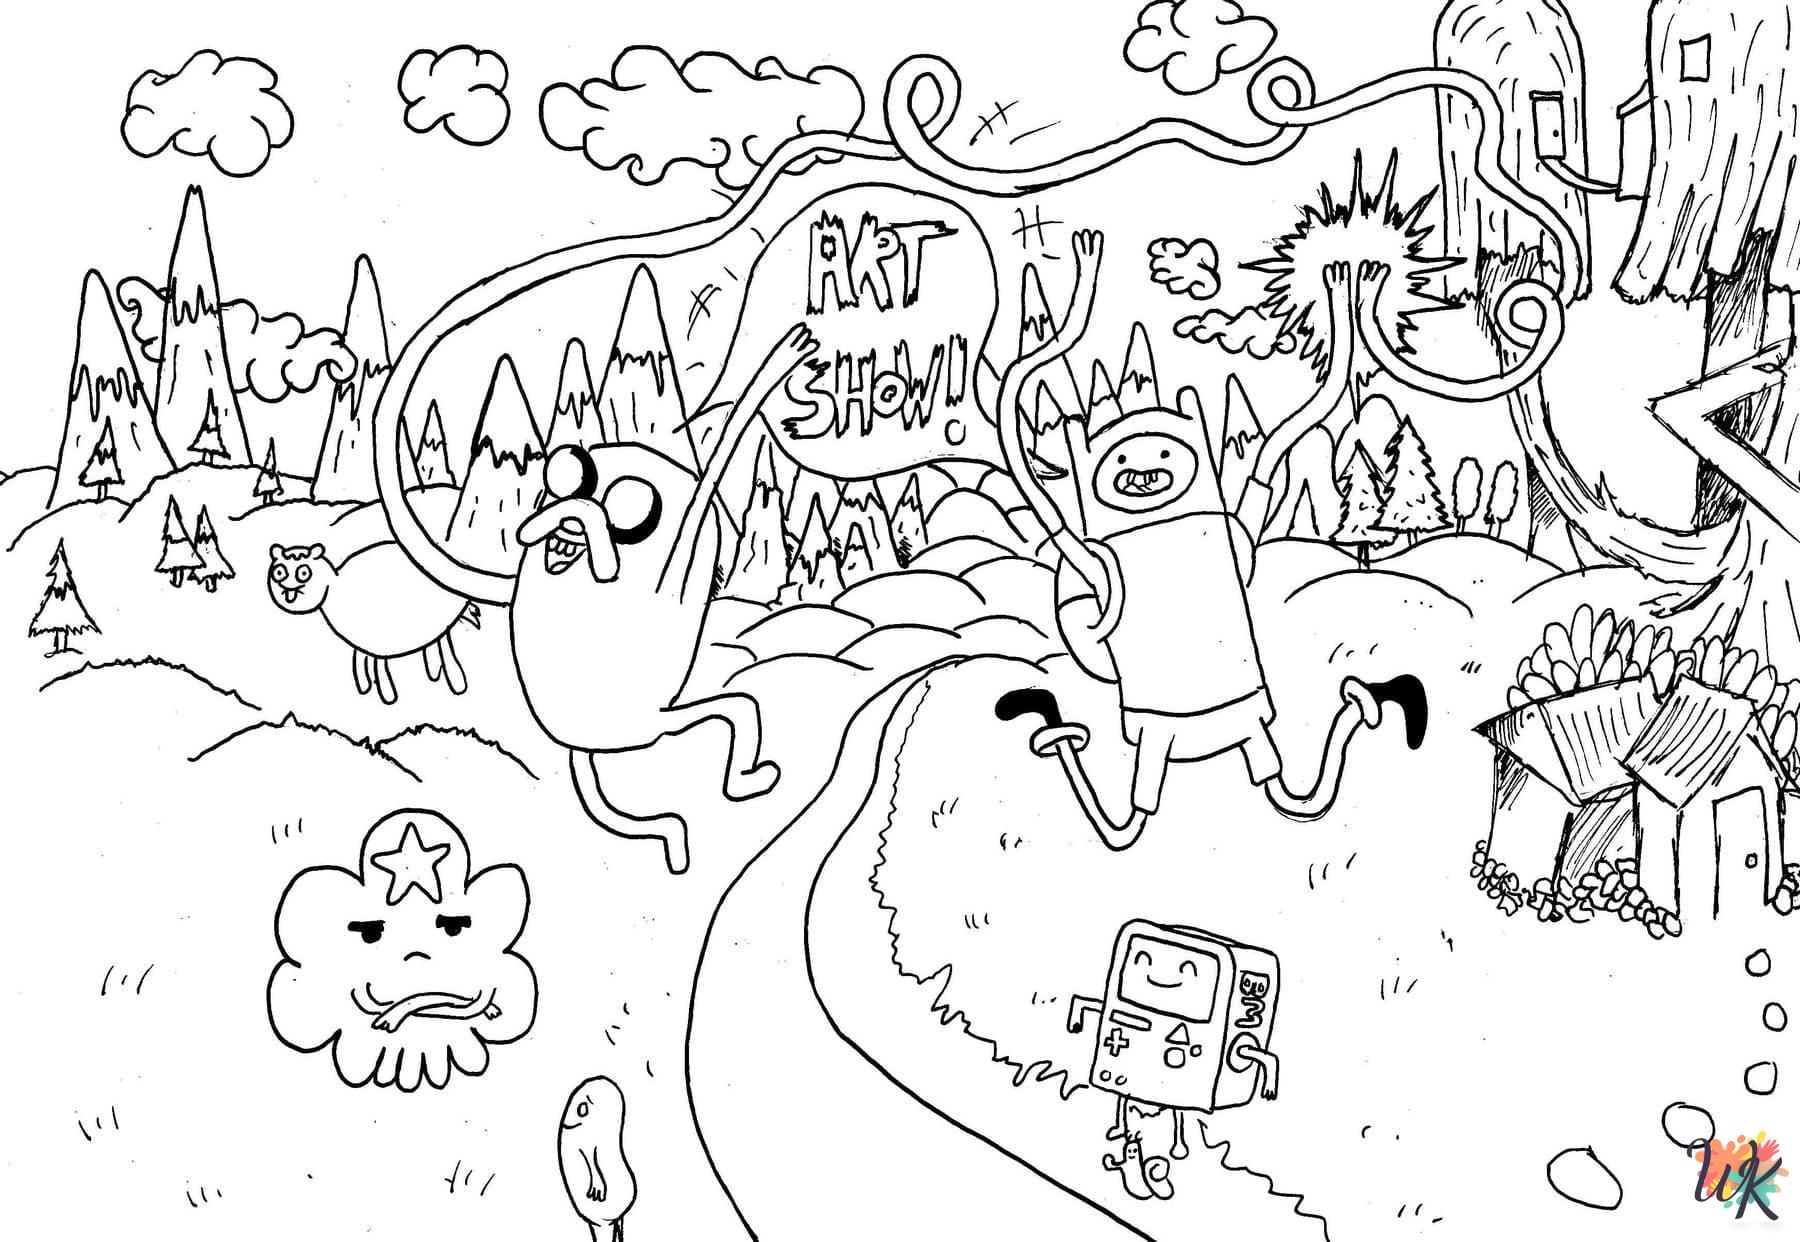 Adventure Time themed coloring pages